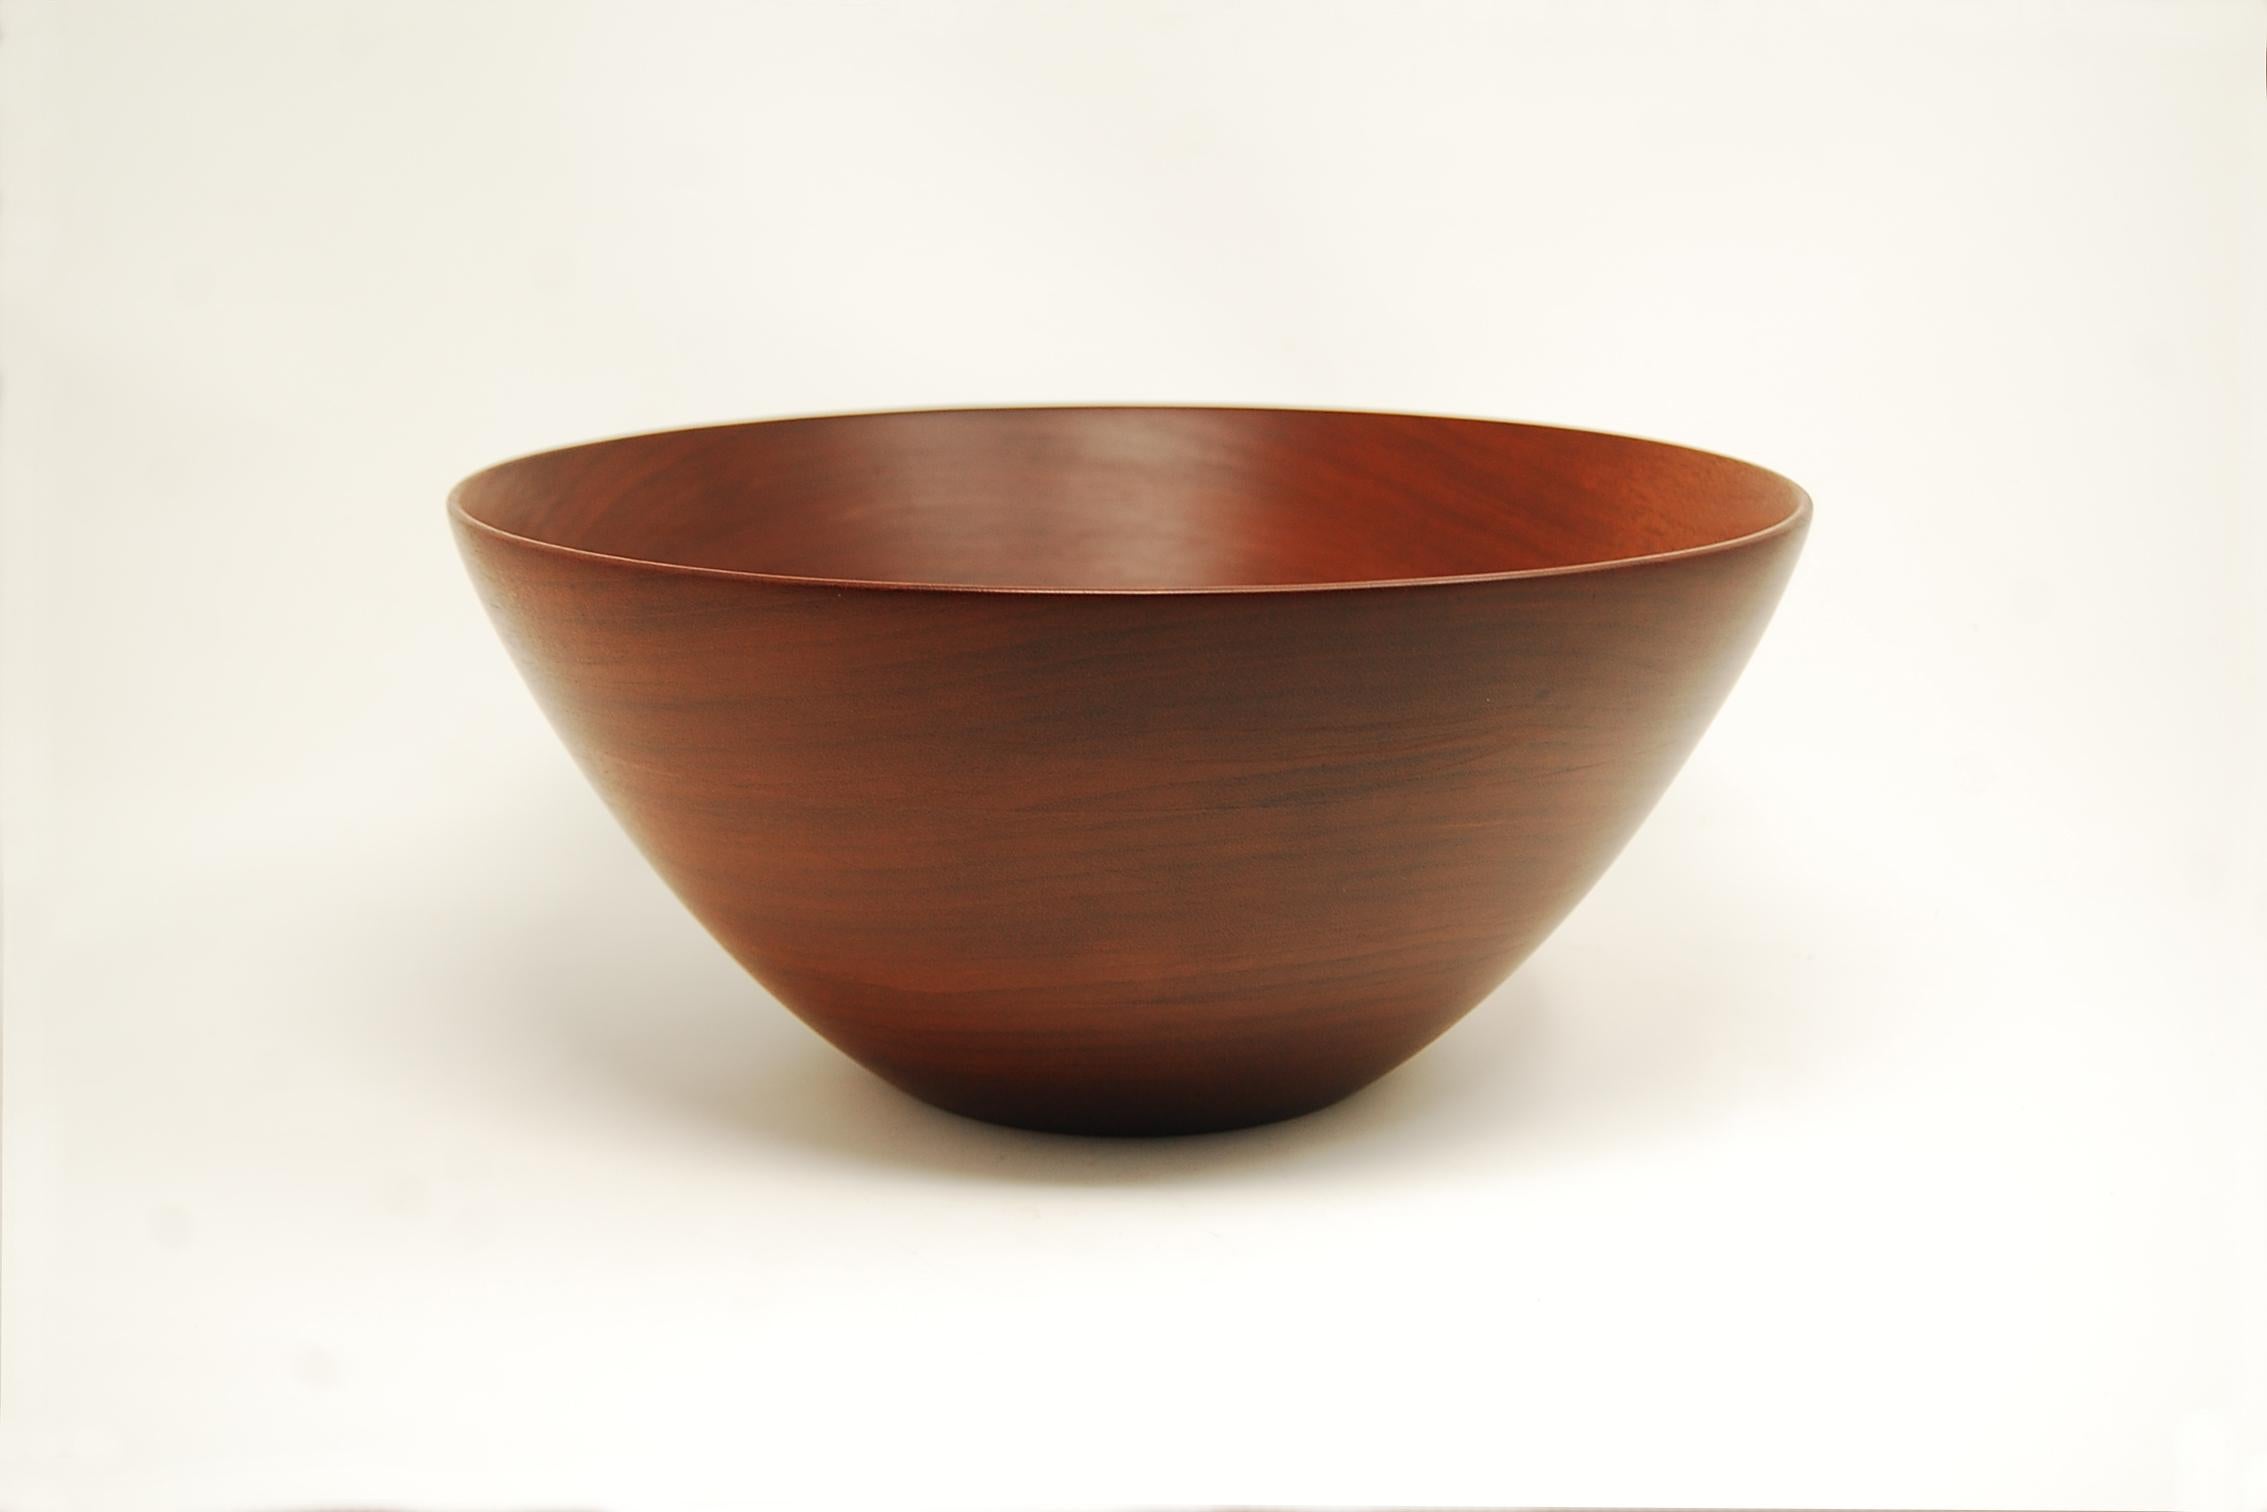 Large, and exquisitely turned Cuban mahogany bowl by Frederik Lunning. Bowl measures 11 15/16